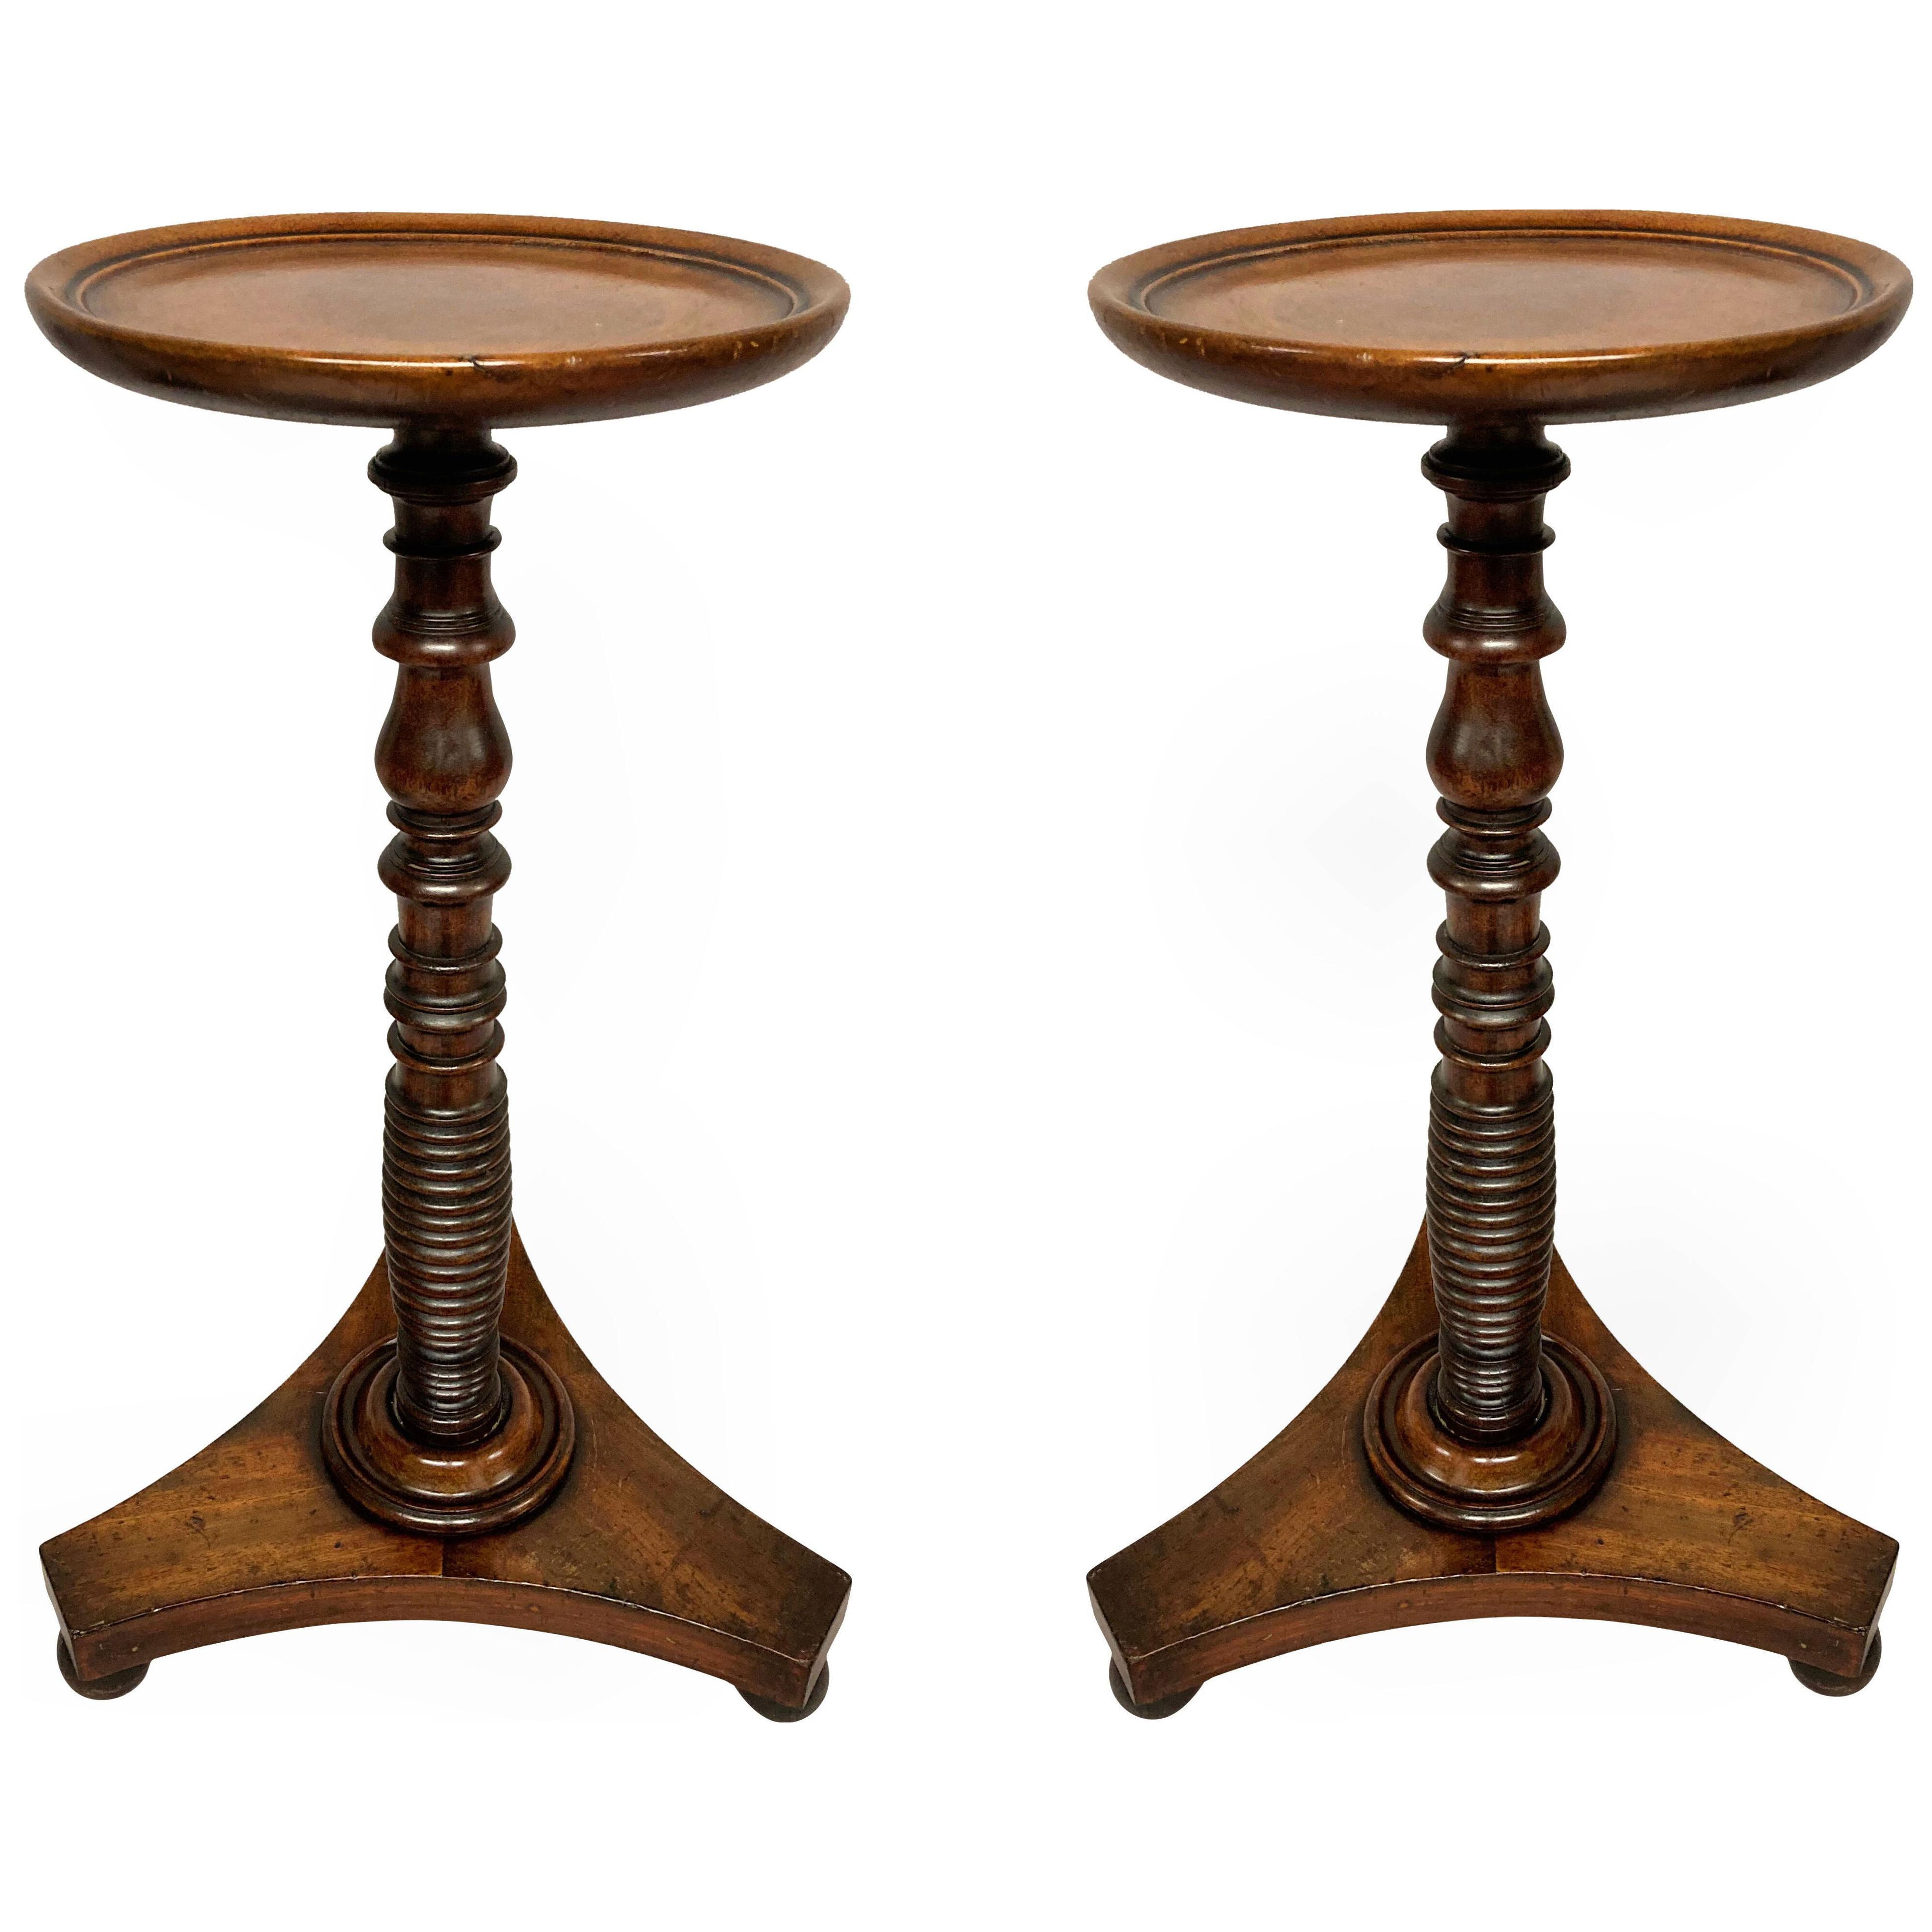 A PAIR OF WILLIAM IV MAHOGANY WINE TABLES